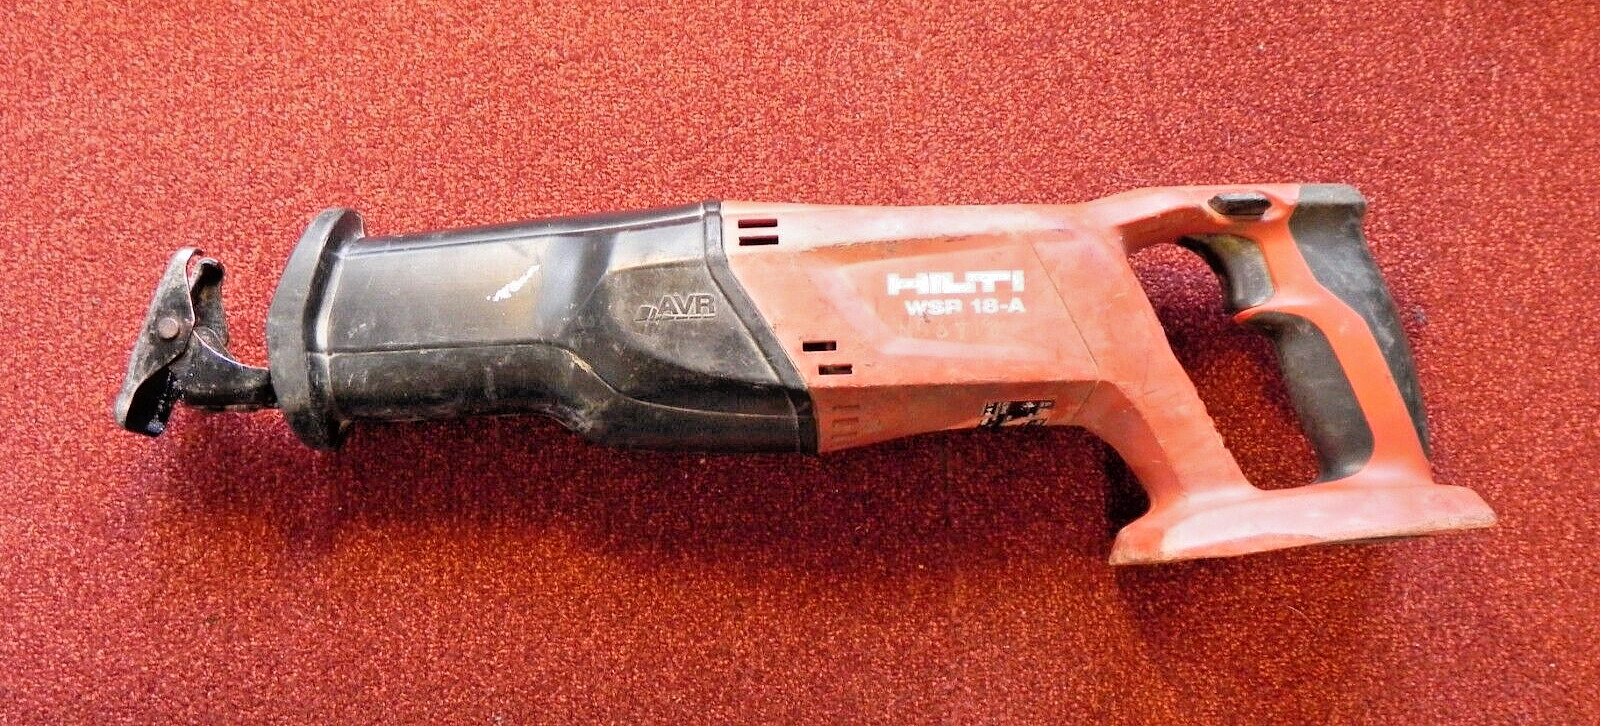 Hilti Wsr 18-a  Cordless Variable Speed Reciprocating  Saw